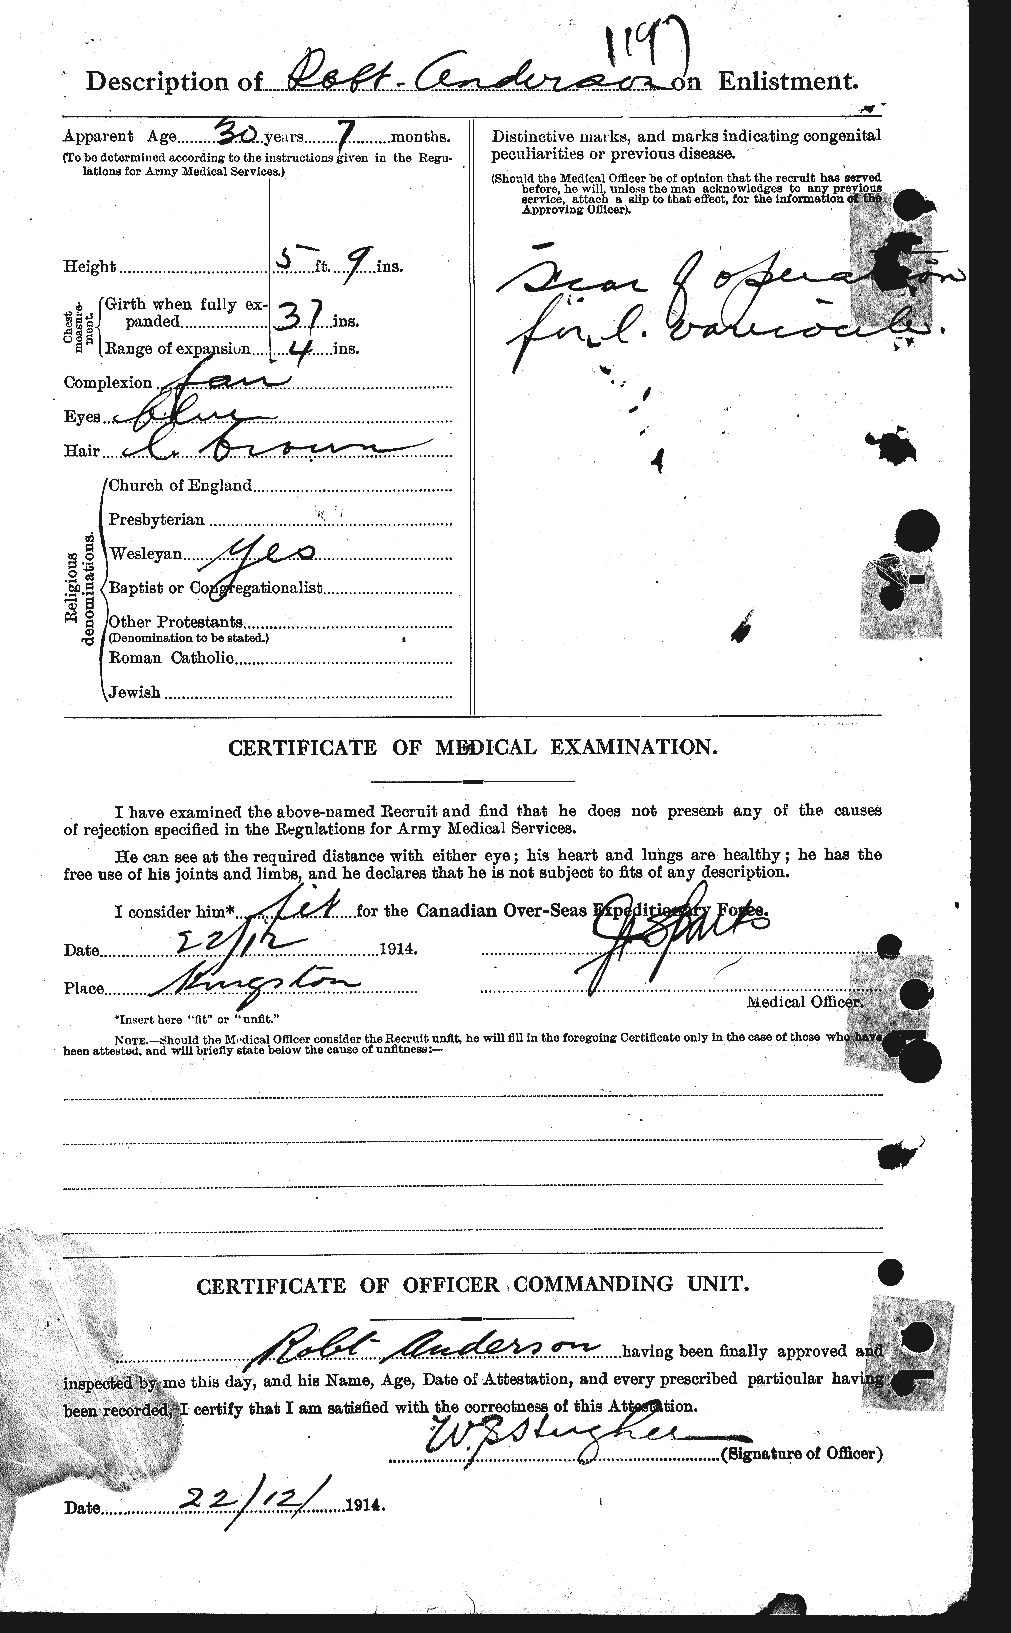 Personnel Records of the First World War - CEF 207312b